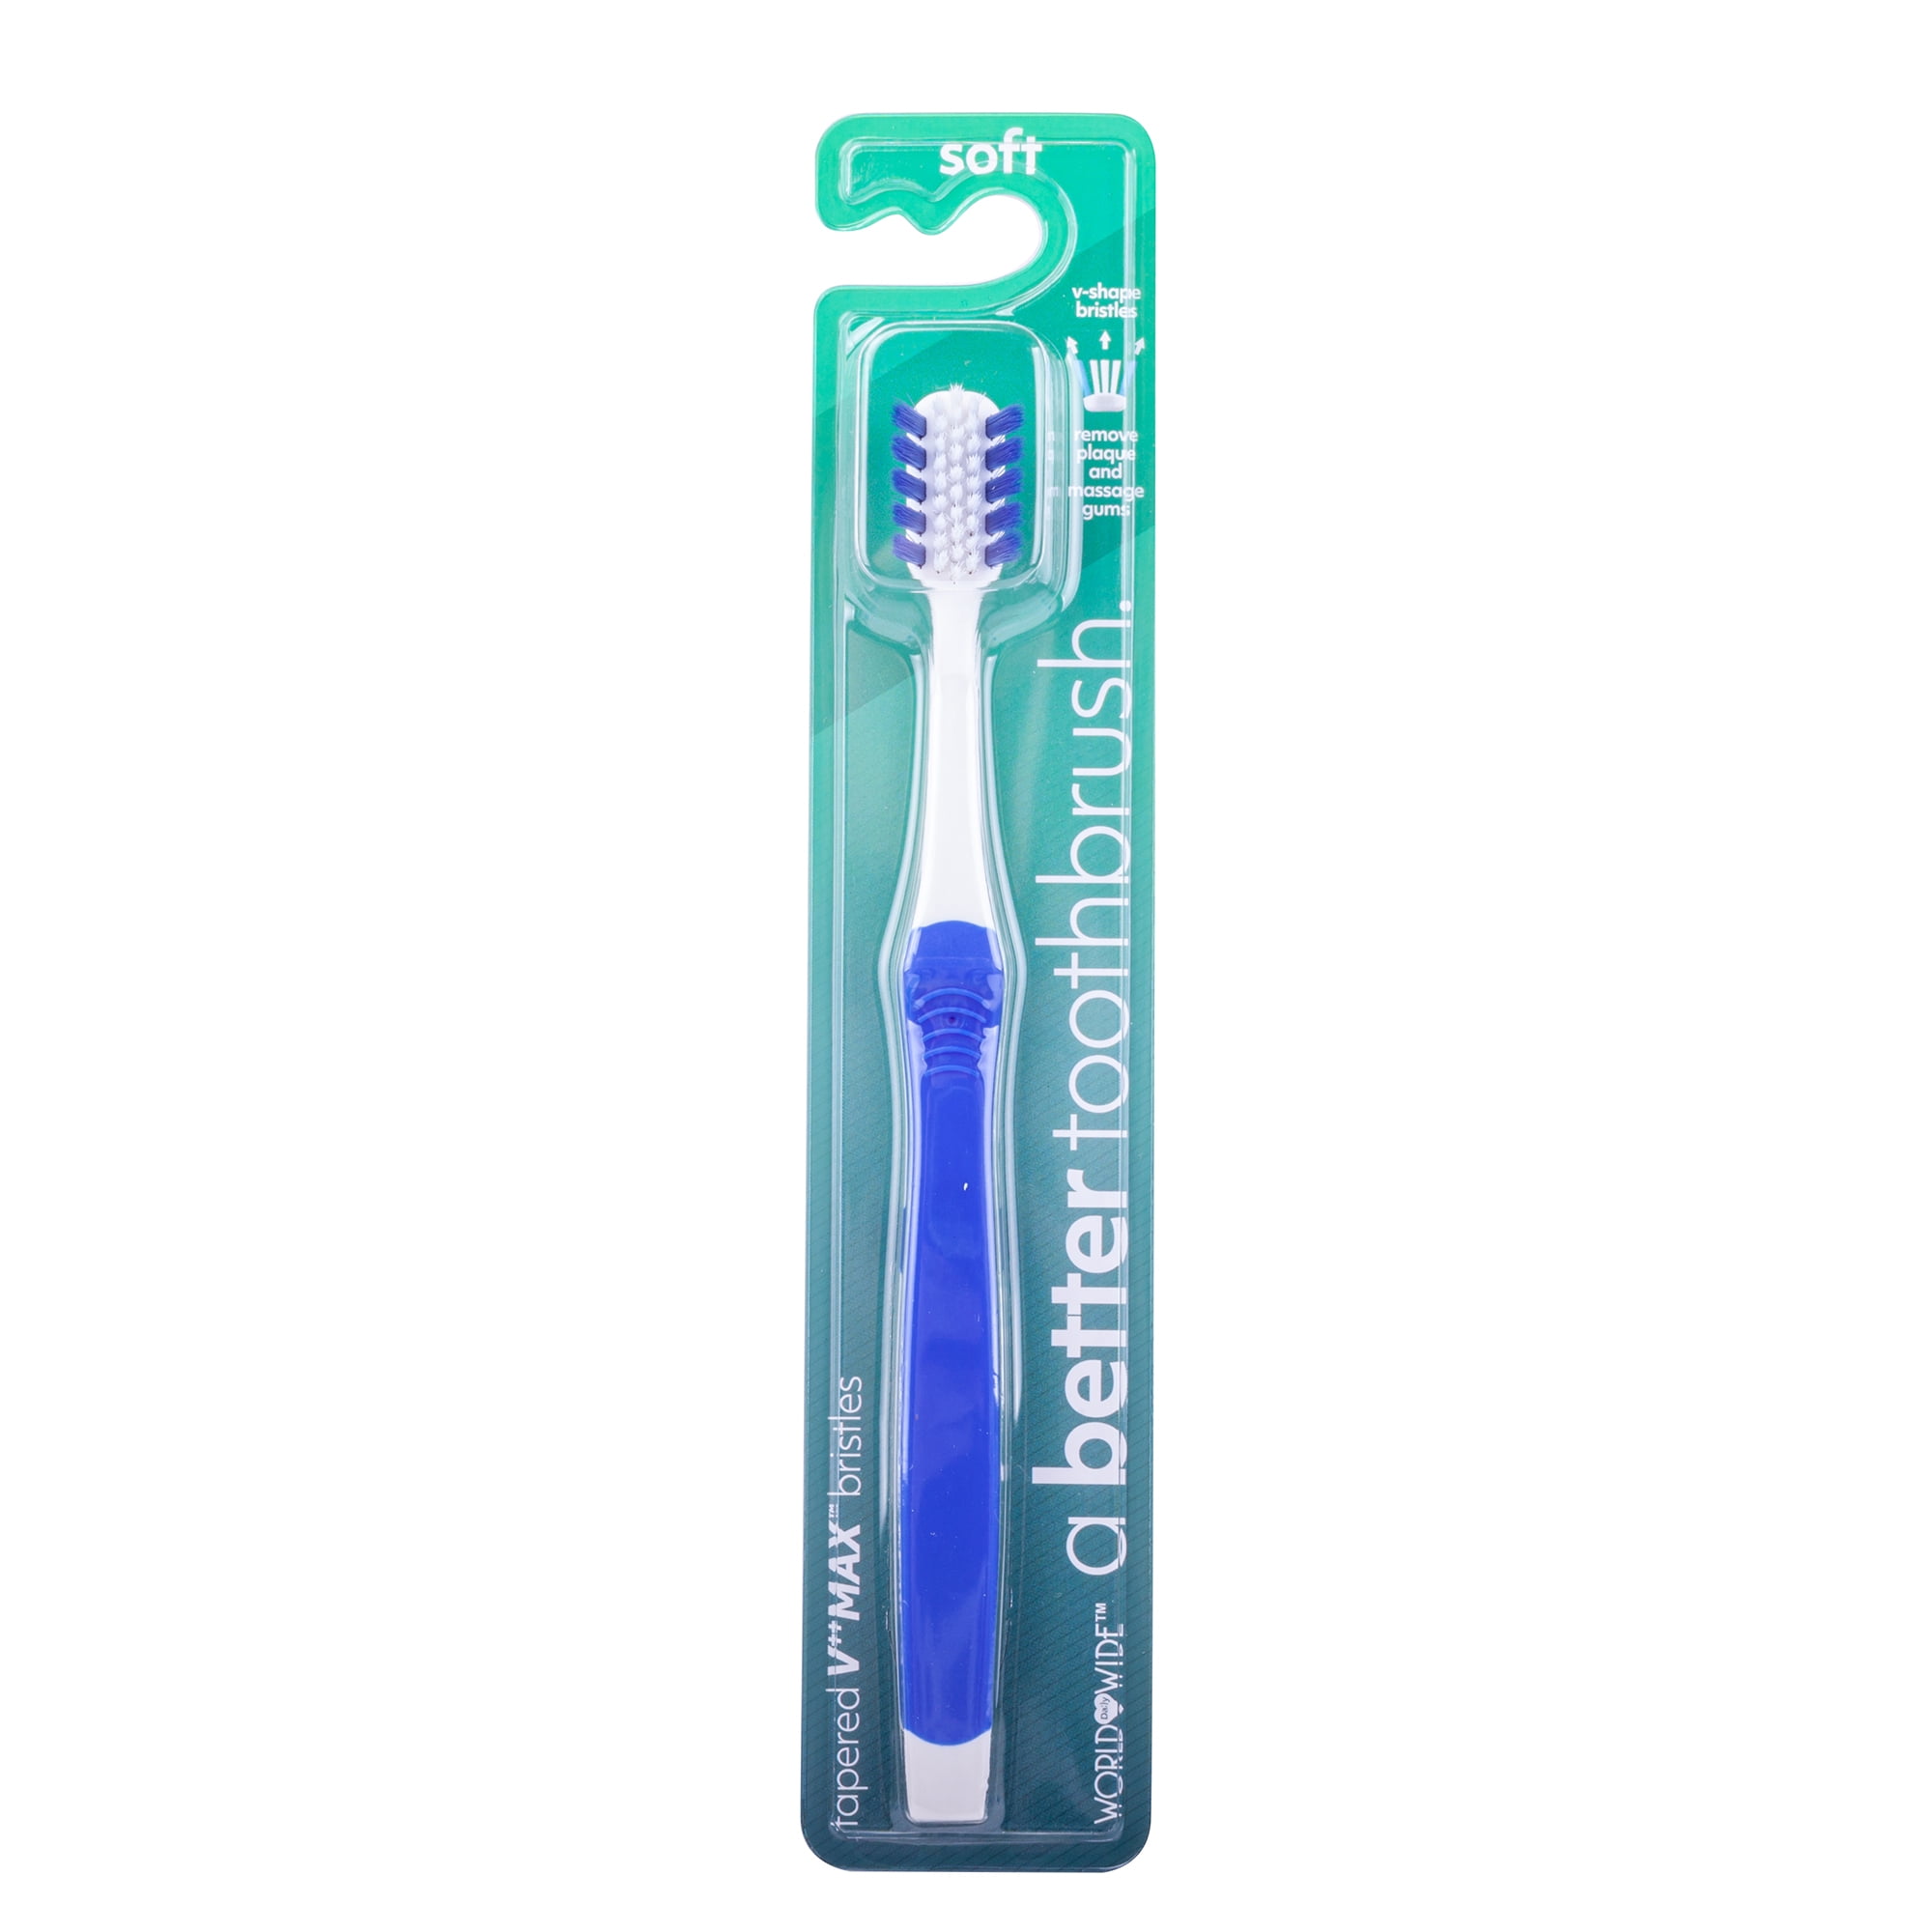 Velocity Little Gem Touch Up Brush Size 3 - HTUB3, Velocity, Shop our  Full Range by Brand at Autobarn, Autobarn Category